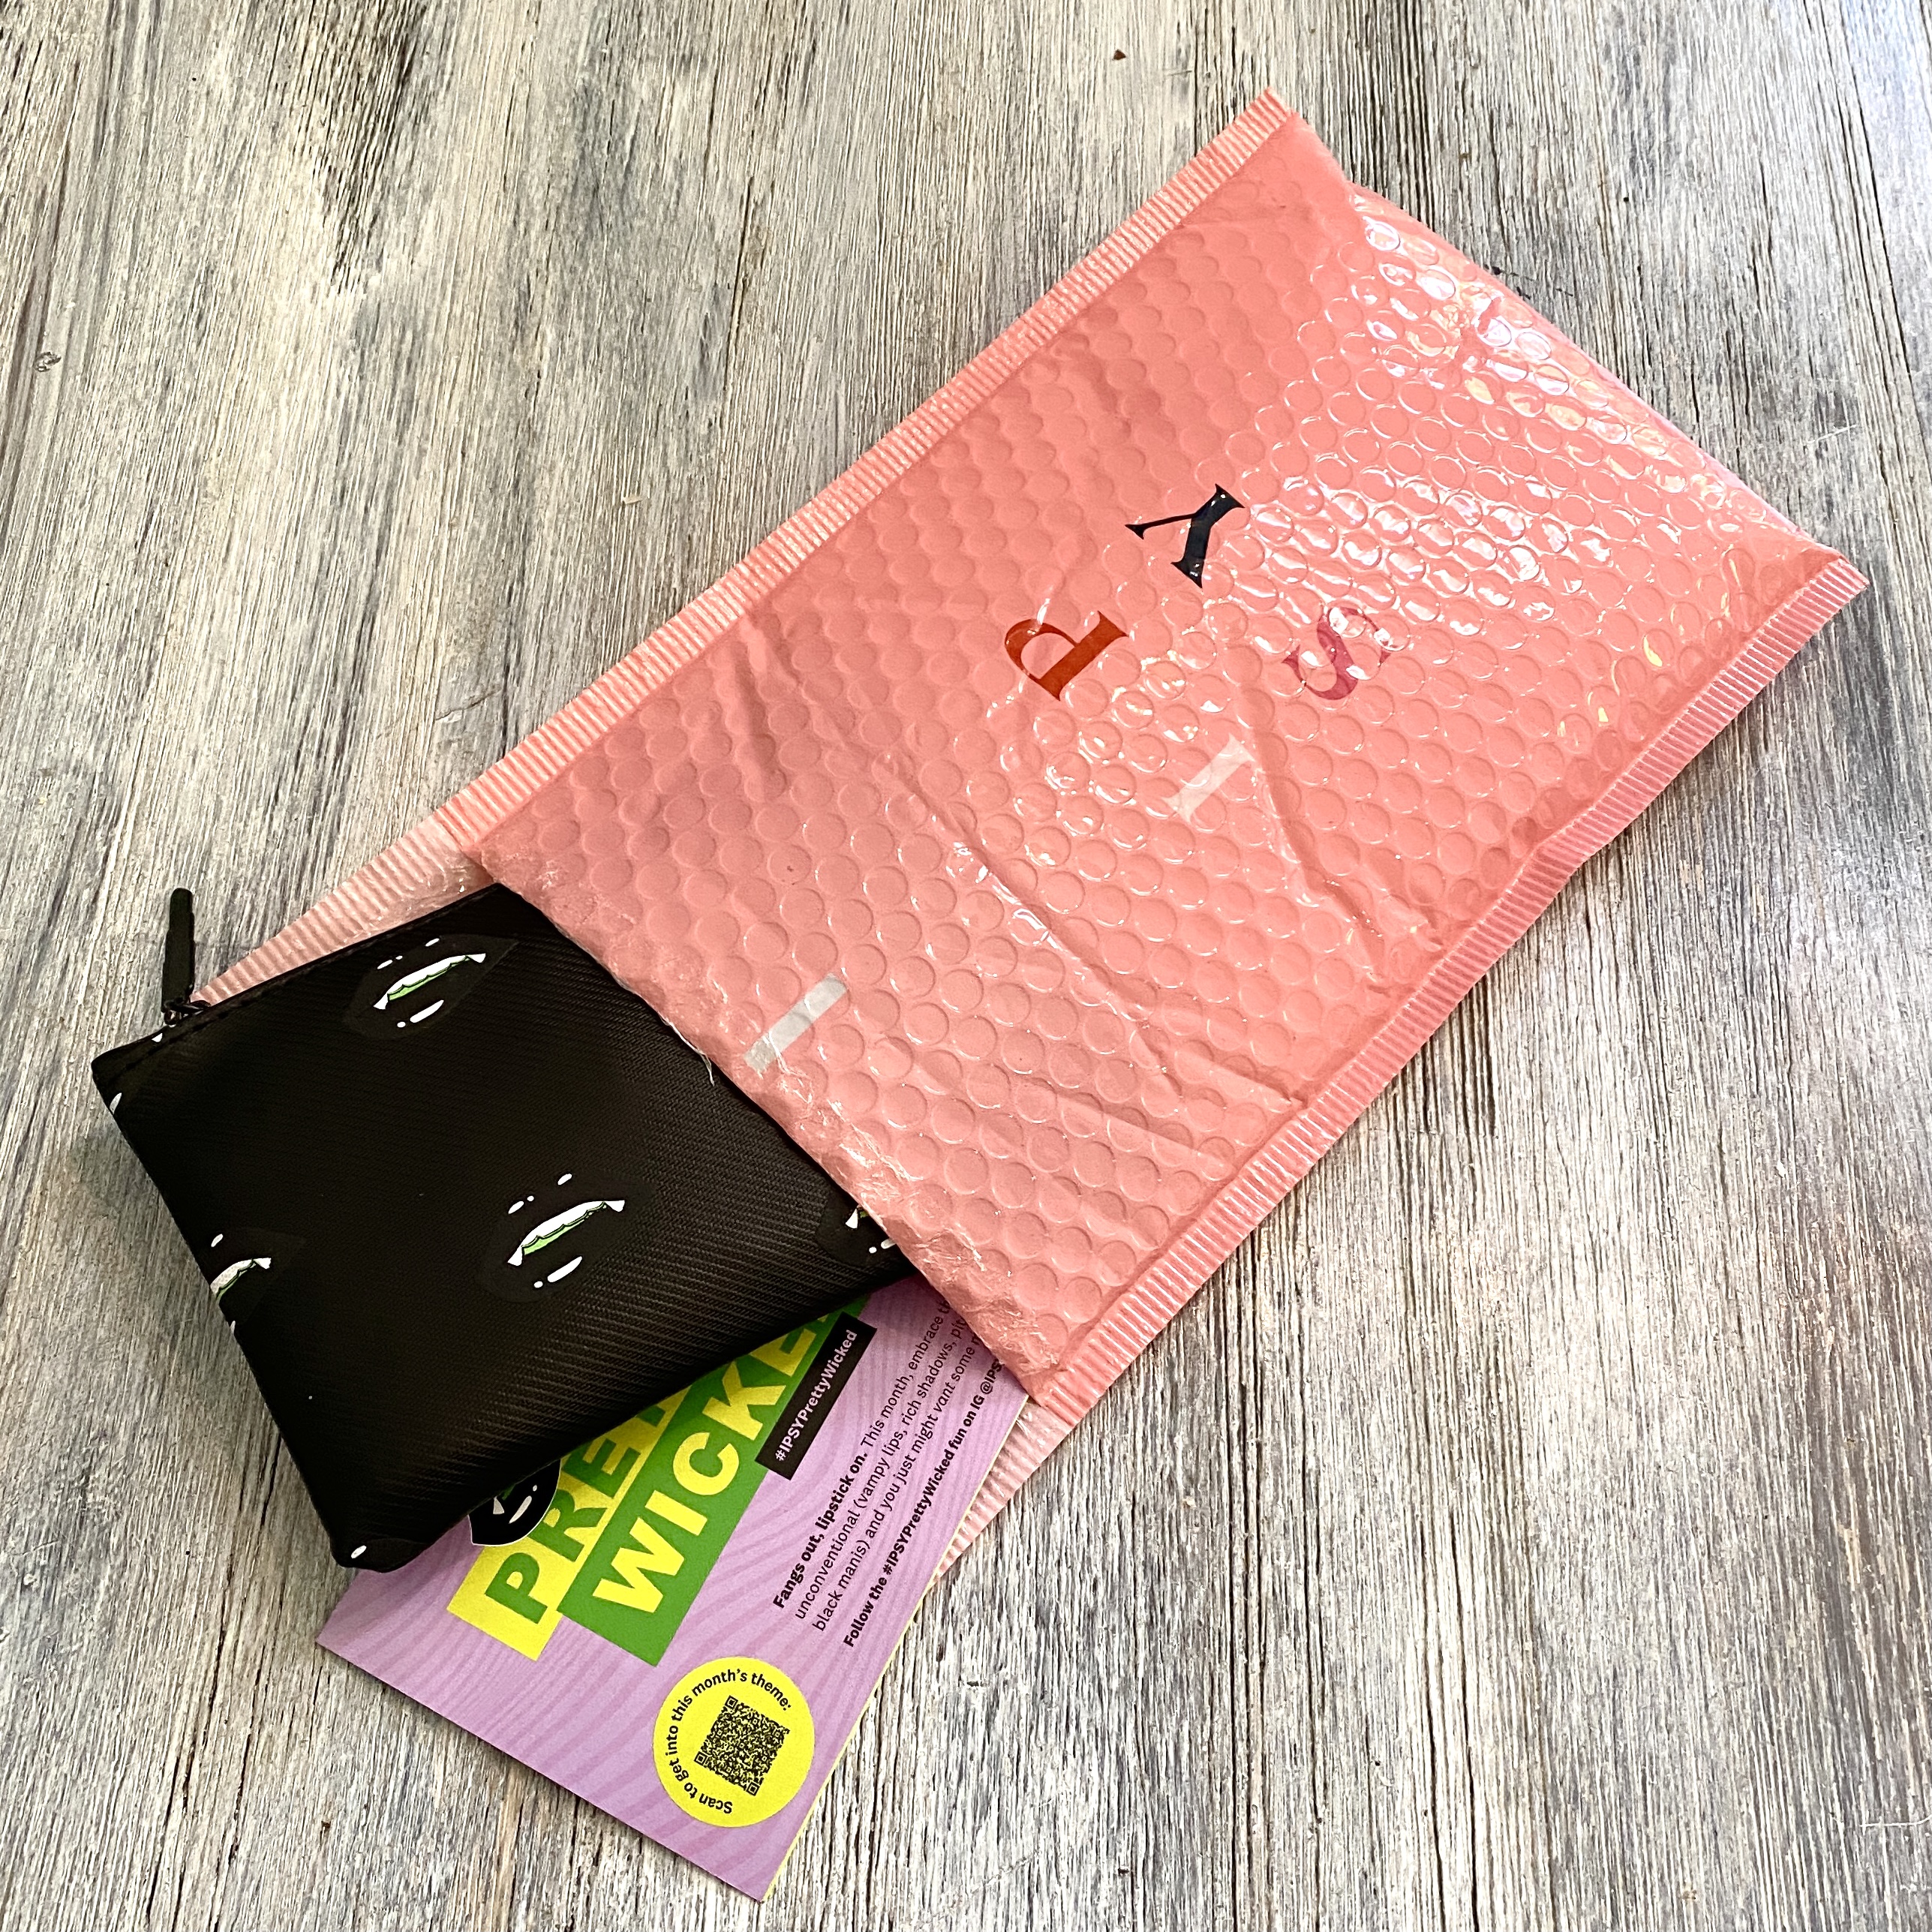 IPSY Glam Bag October 2021 Review: ANASTASIA BEVERLY HILLS, thisworks, and More!